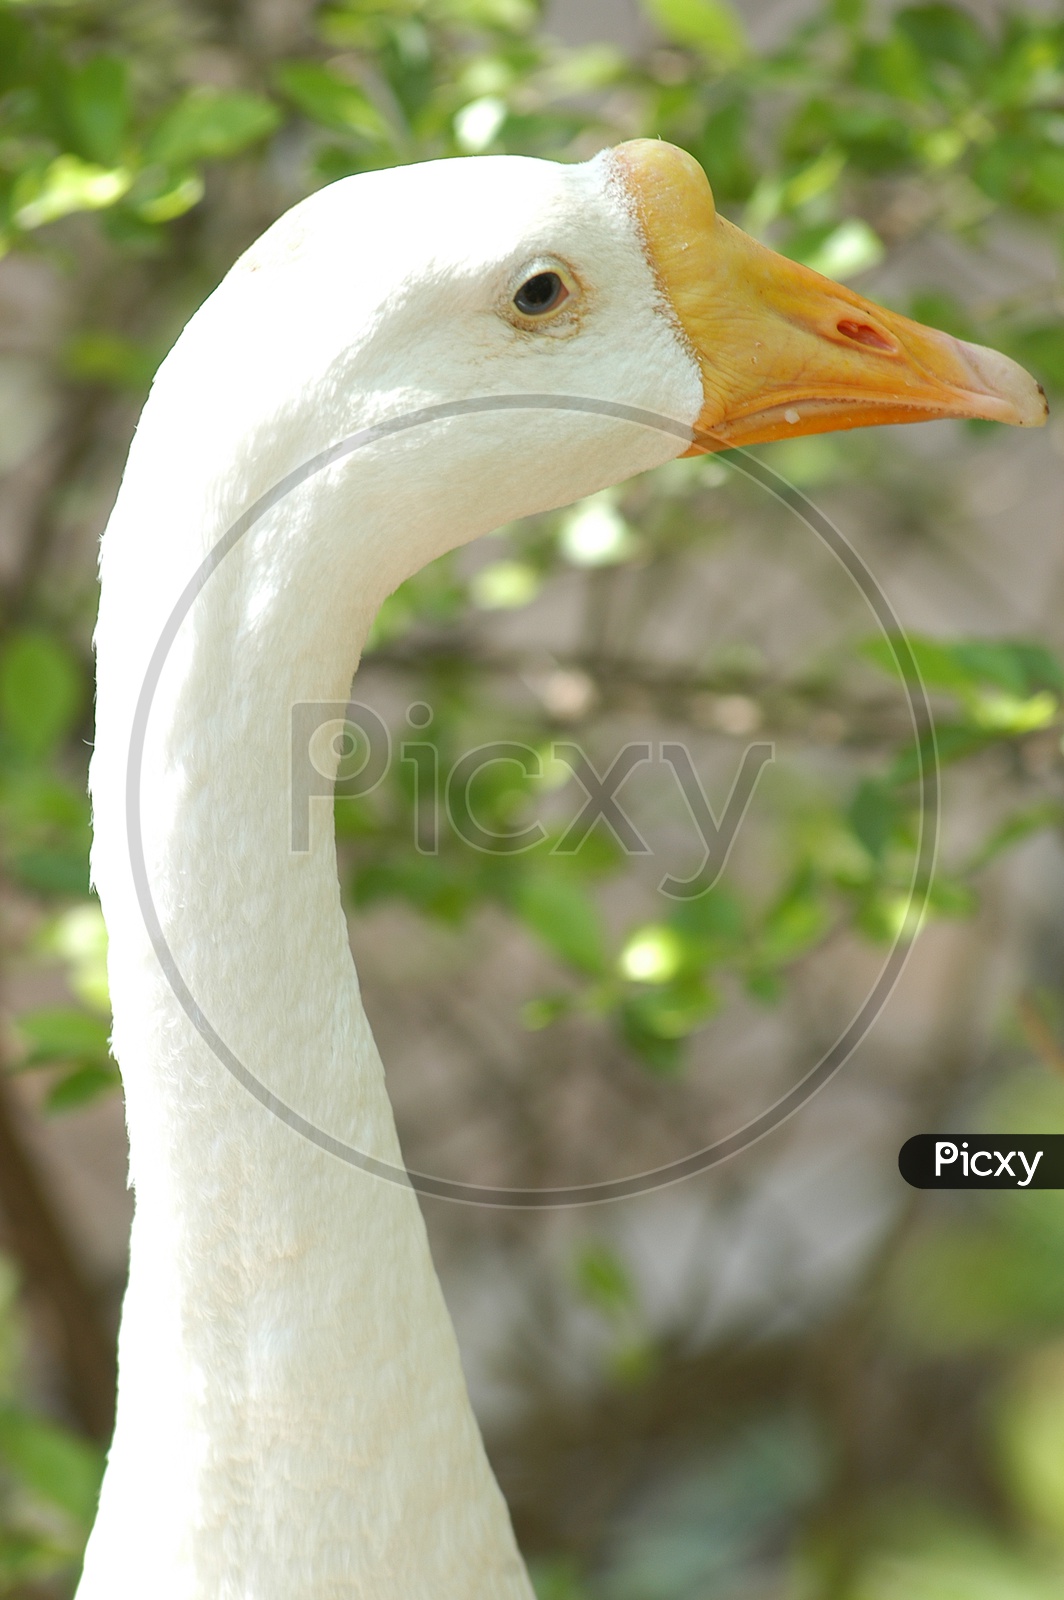 A Duck's neck